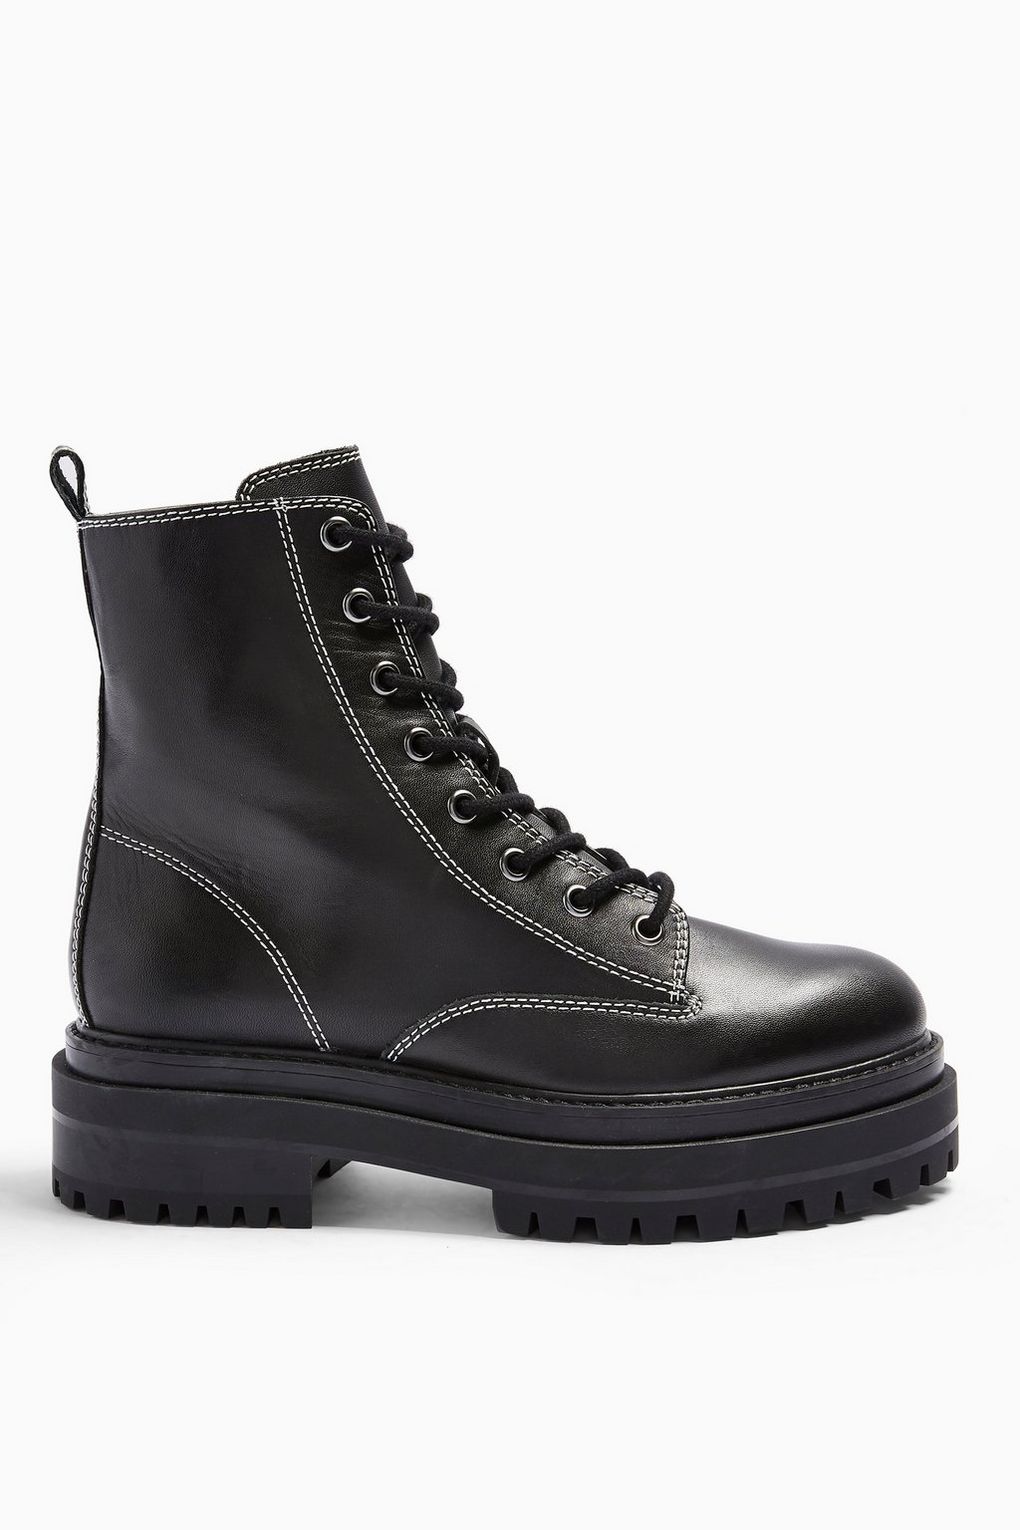 Topshop + Alanis Leather Black Lace Up Boots